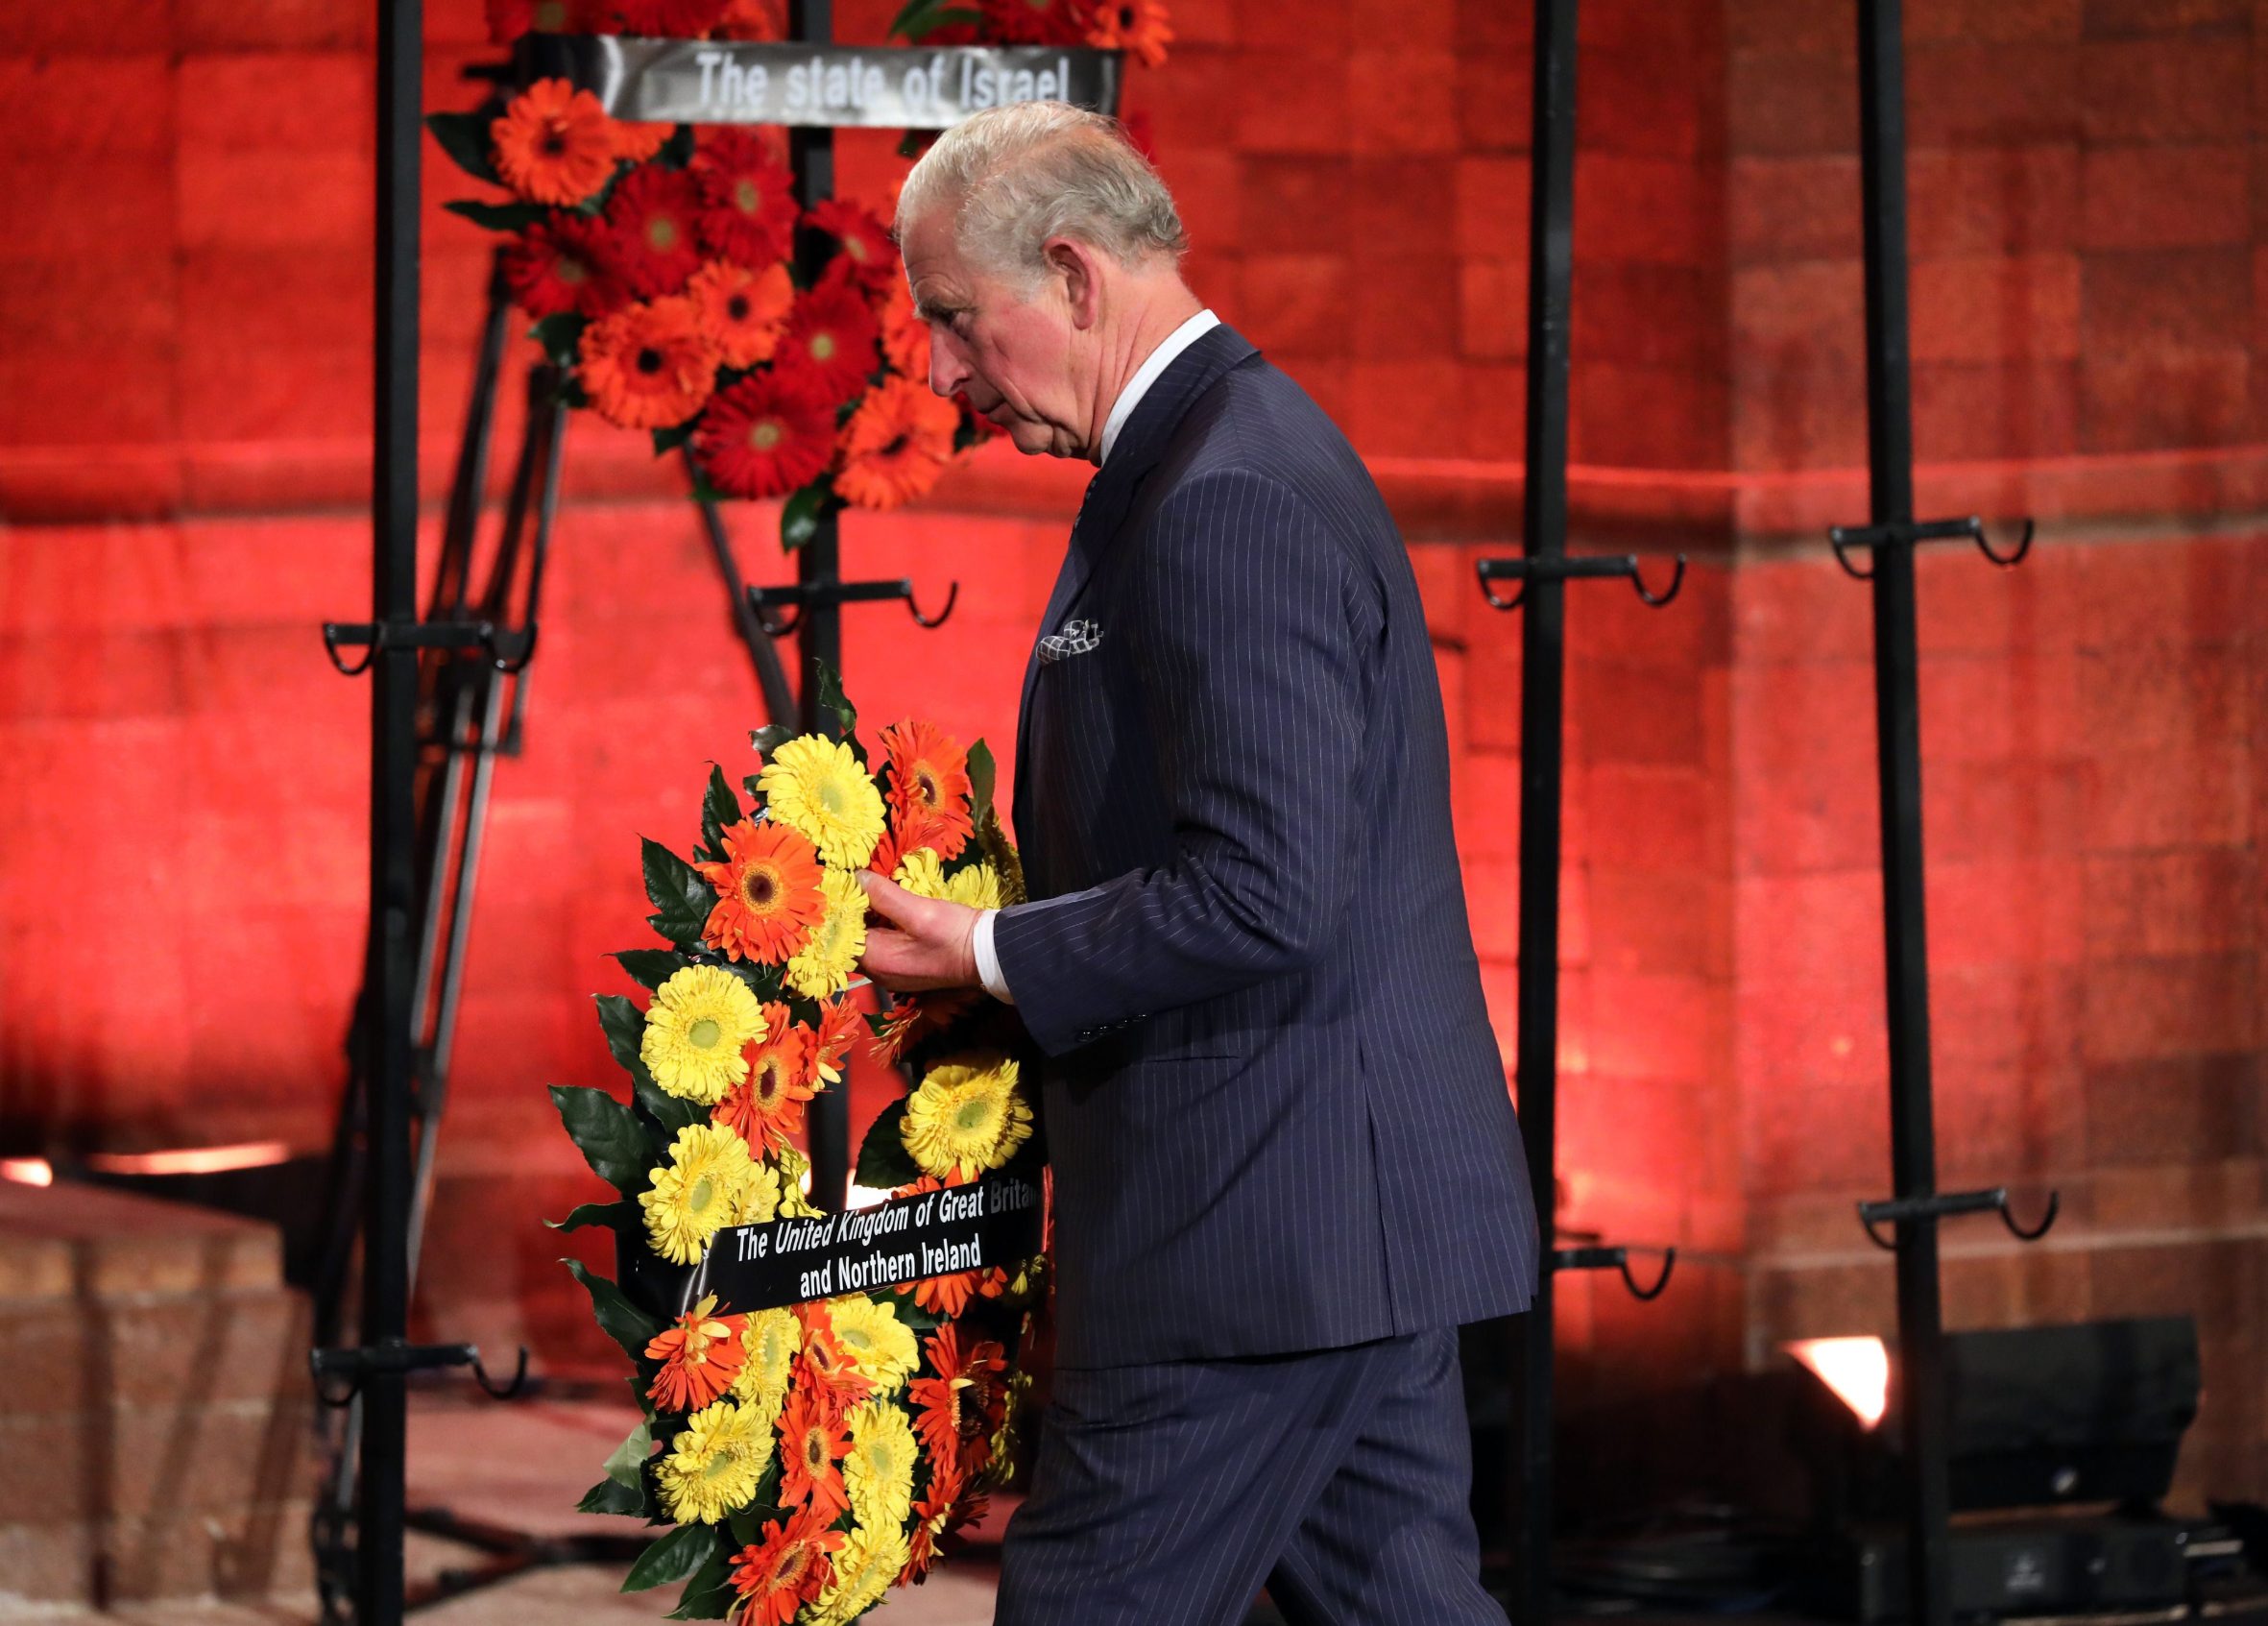 Britains Prince Charles lays a wreath during the Fifth World Holocaust Forum at the Yad Vashem Holocaust memorial museum in Jerusalem on January 23, 2020. - Their faces lined by age and haunting memories, about 100 Holocaust survivors joined political leaders Thursday in Jerusalem to recall the liberation of the Auschwitz death camp 75 years ago. (Photo by Abir SULTAN / POOL / AFP)